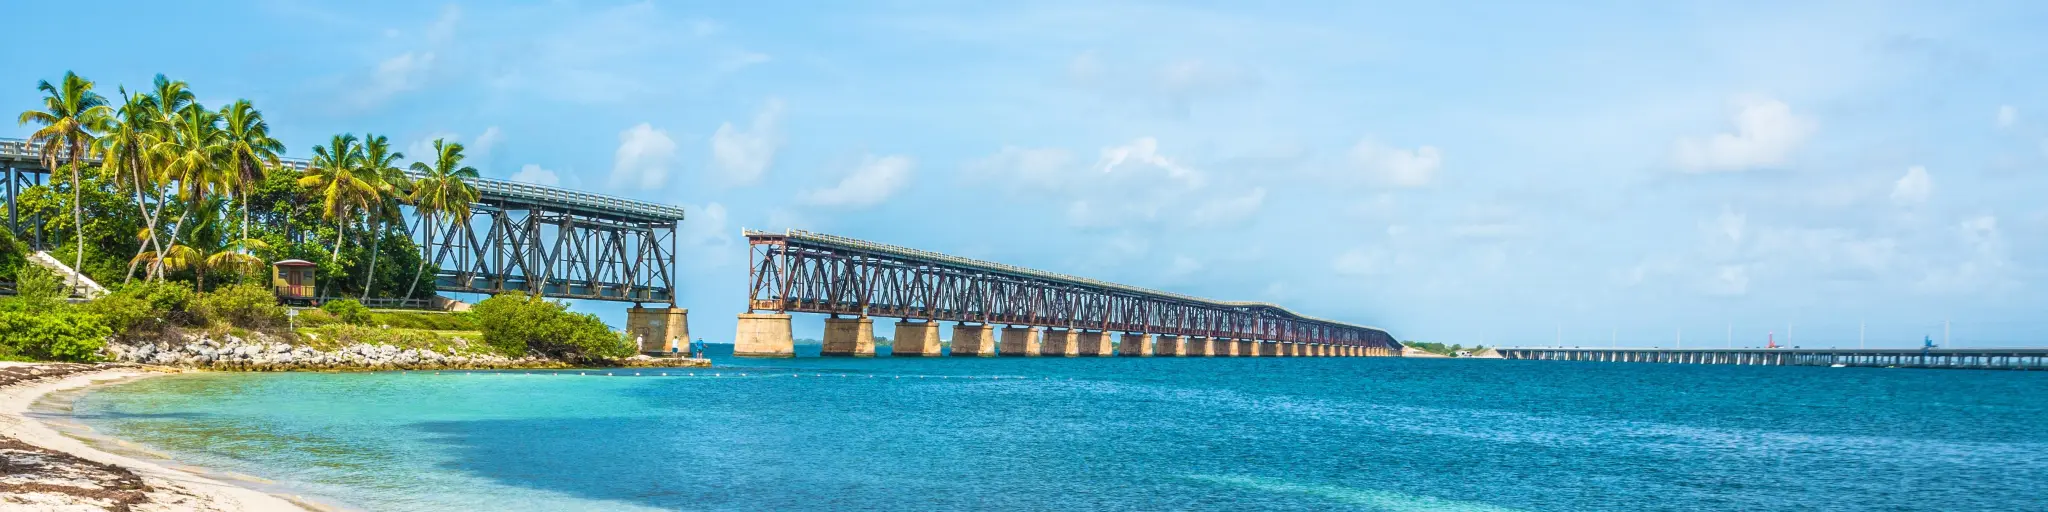 The view from the beach on a sunny day, on the broken railroad bridge in Key West